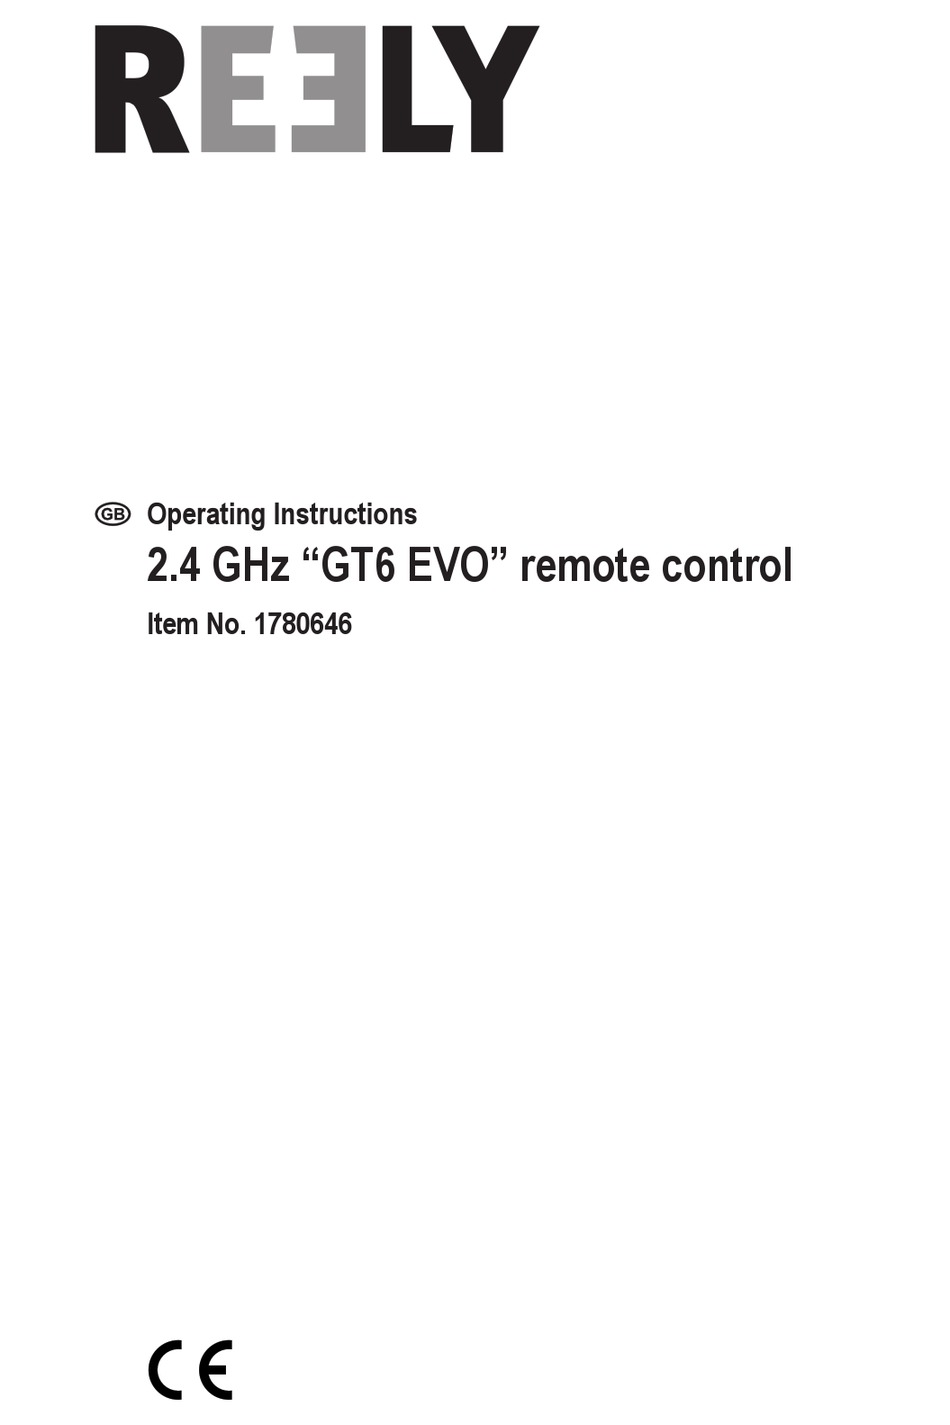 REELY GT6 EVO OPERATING INSTRUCTIONS MANUAL Pdf Download